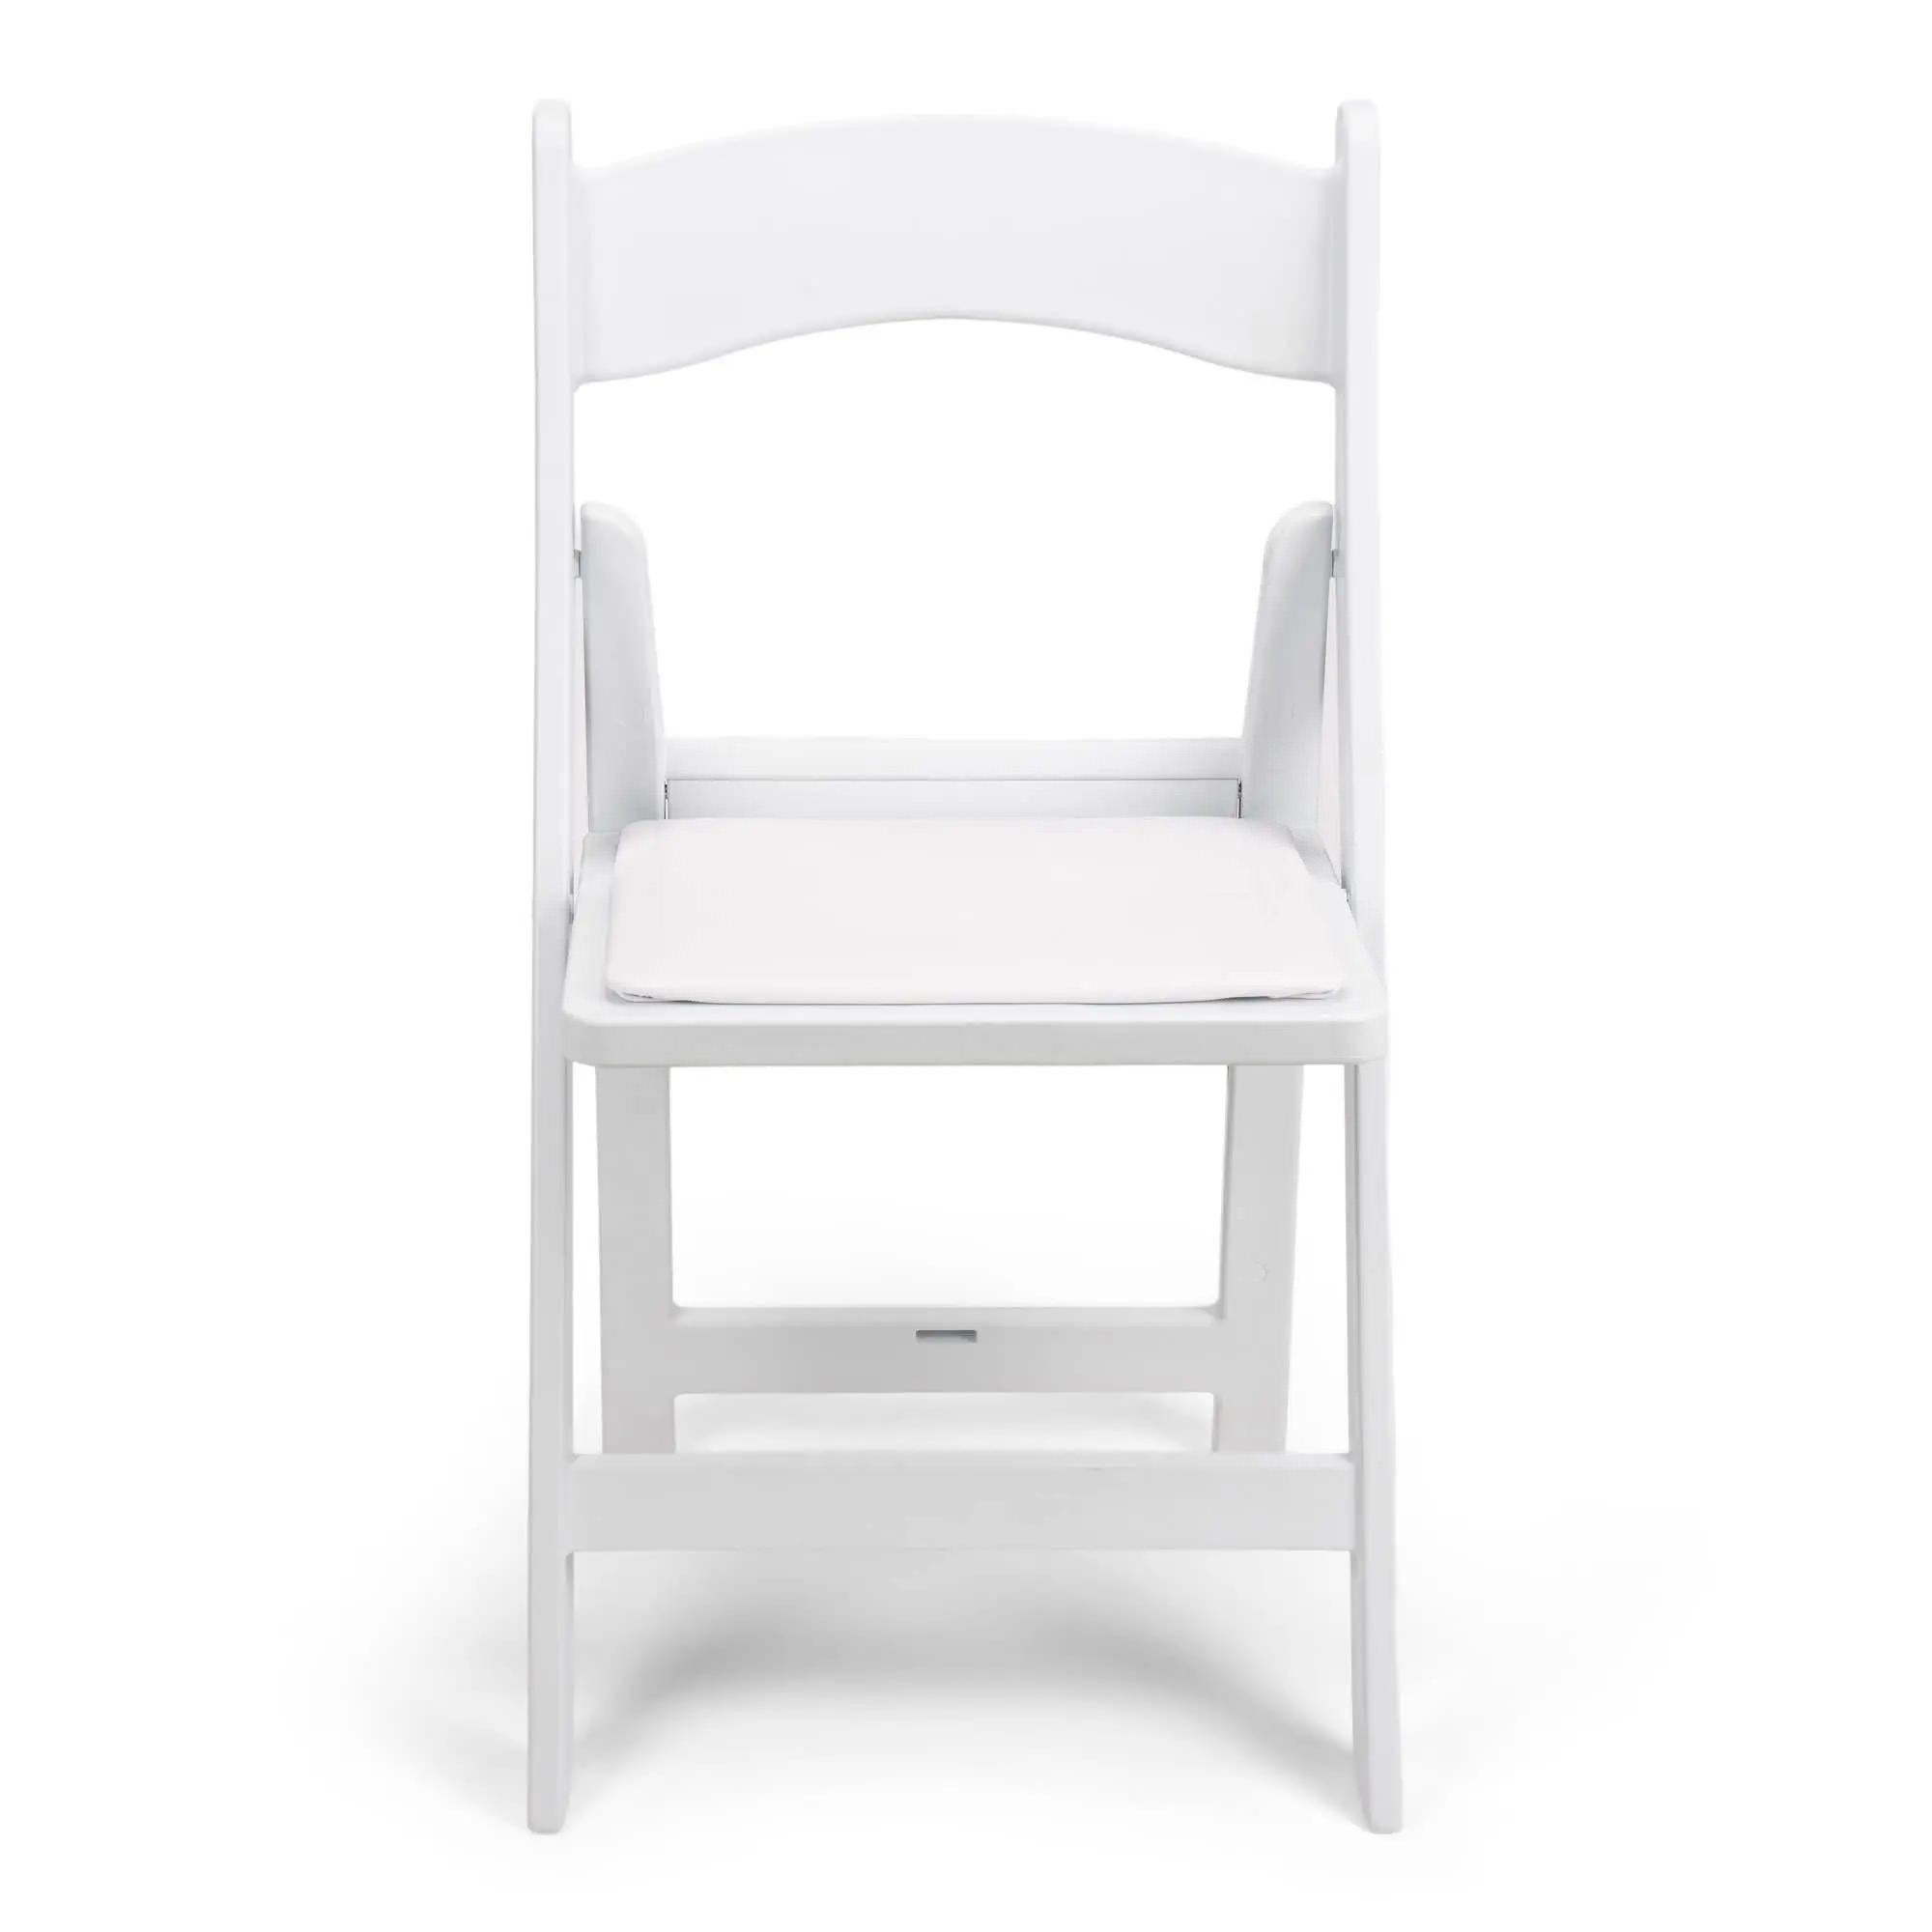 white-resin-folding-chairs-with-padded-seat-hughes-event-rentals-charleston-sc6.jpeg